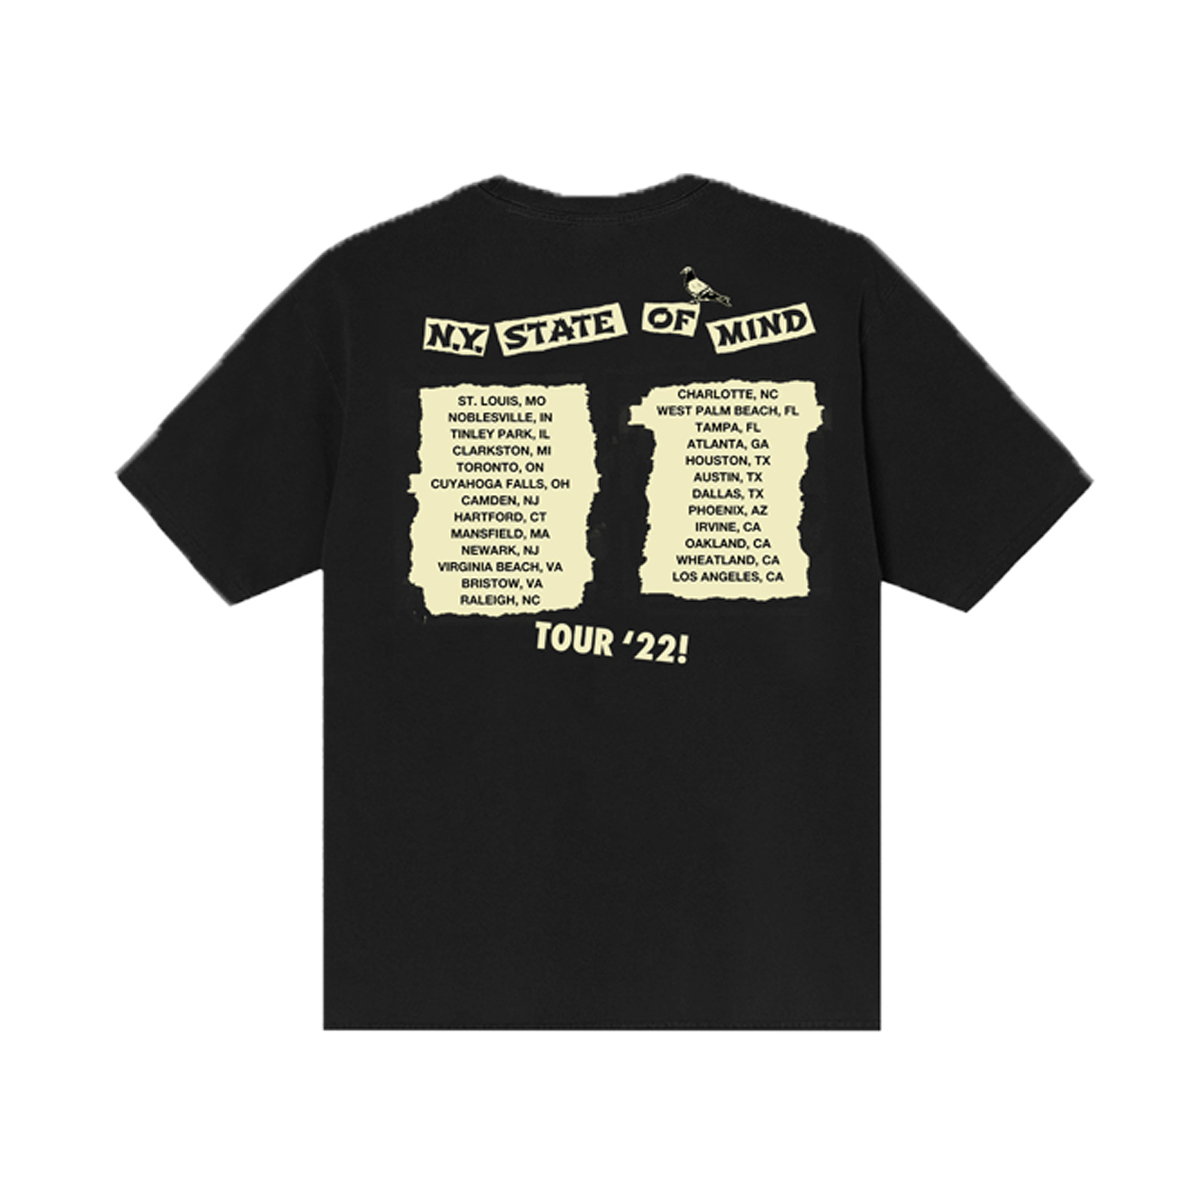 NY State of Mind Tour Tee